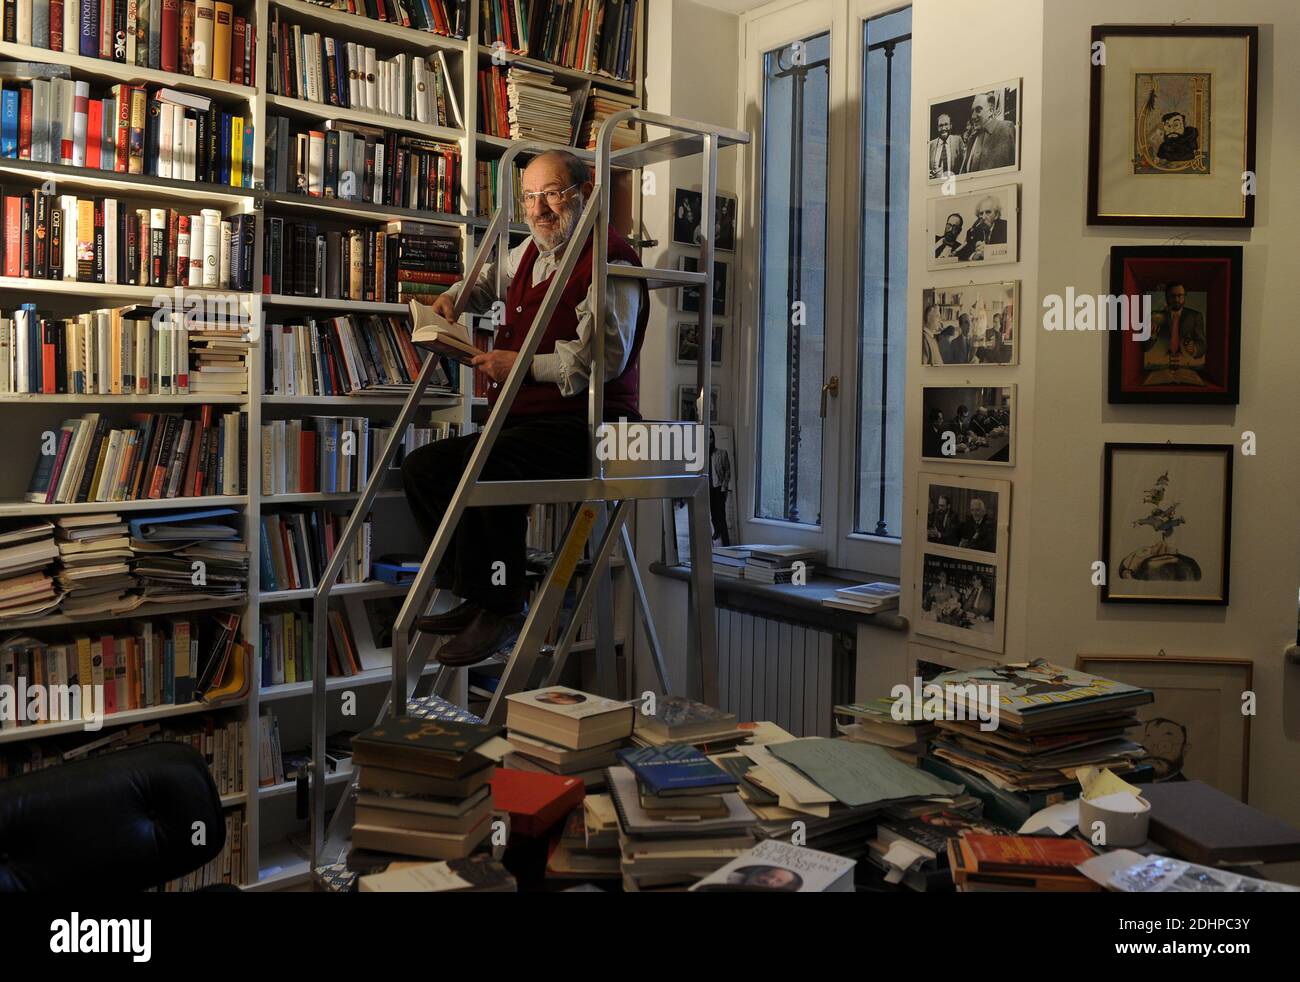 File photo : Italian writer Umberto Eco at home in Milan, Italy on March 6,  2014. Eco, best known for his novel The Name of the Rose, has died aged 84.  His